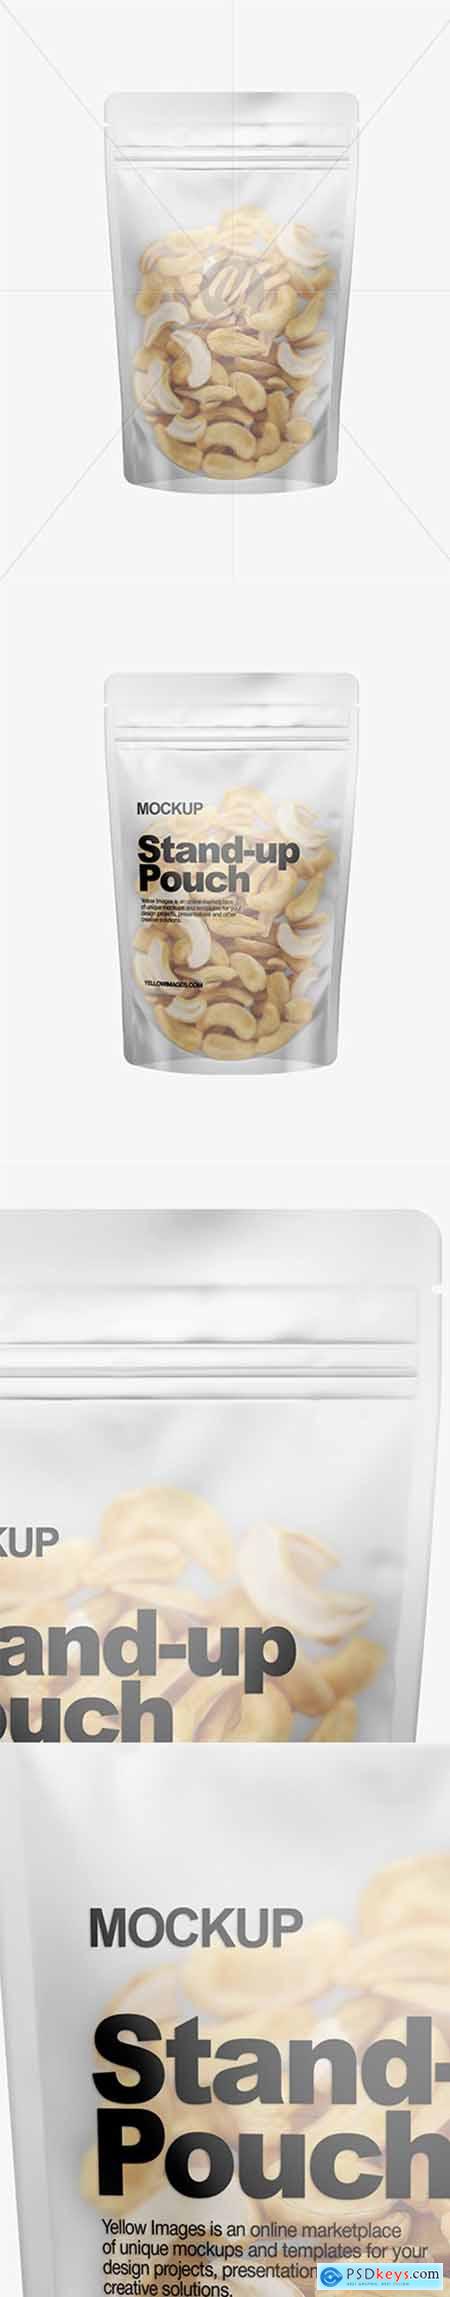 Frosted Stand-Up Pouch W Cashew Nuts Mockup 36114